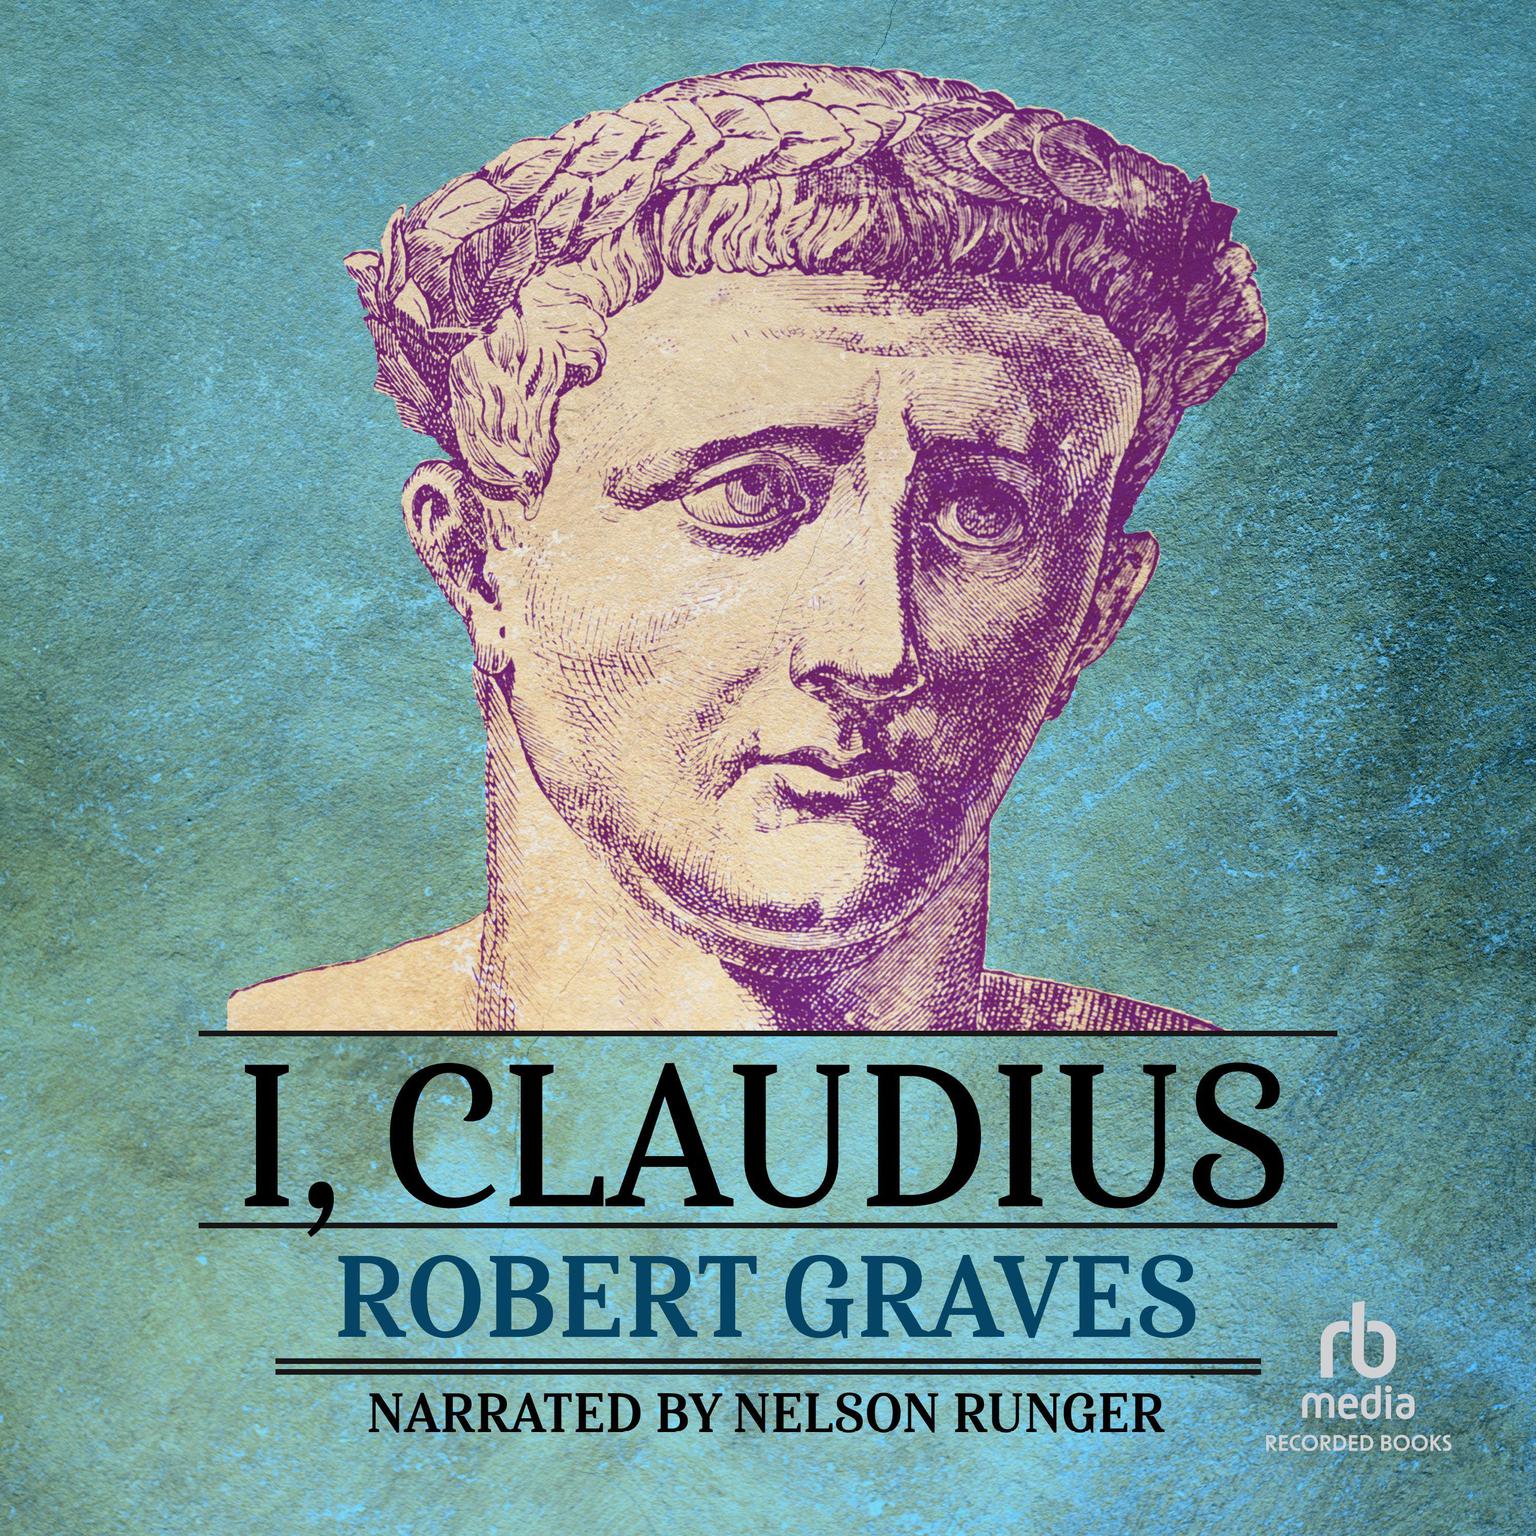 I, Claudius: From the Autobiography of Tiberius Claudius, Born 10 BC, Murdered and Deified AD 54 Audiobook, by Robert Graves